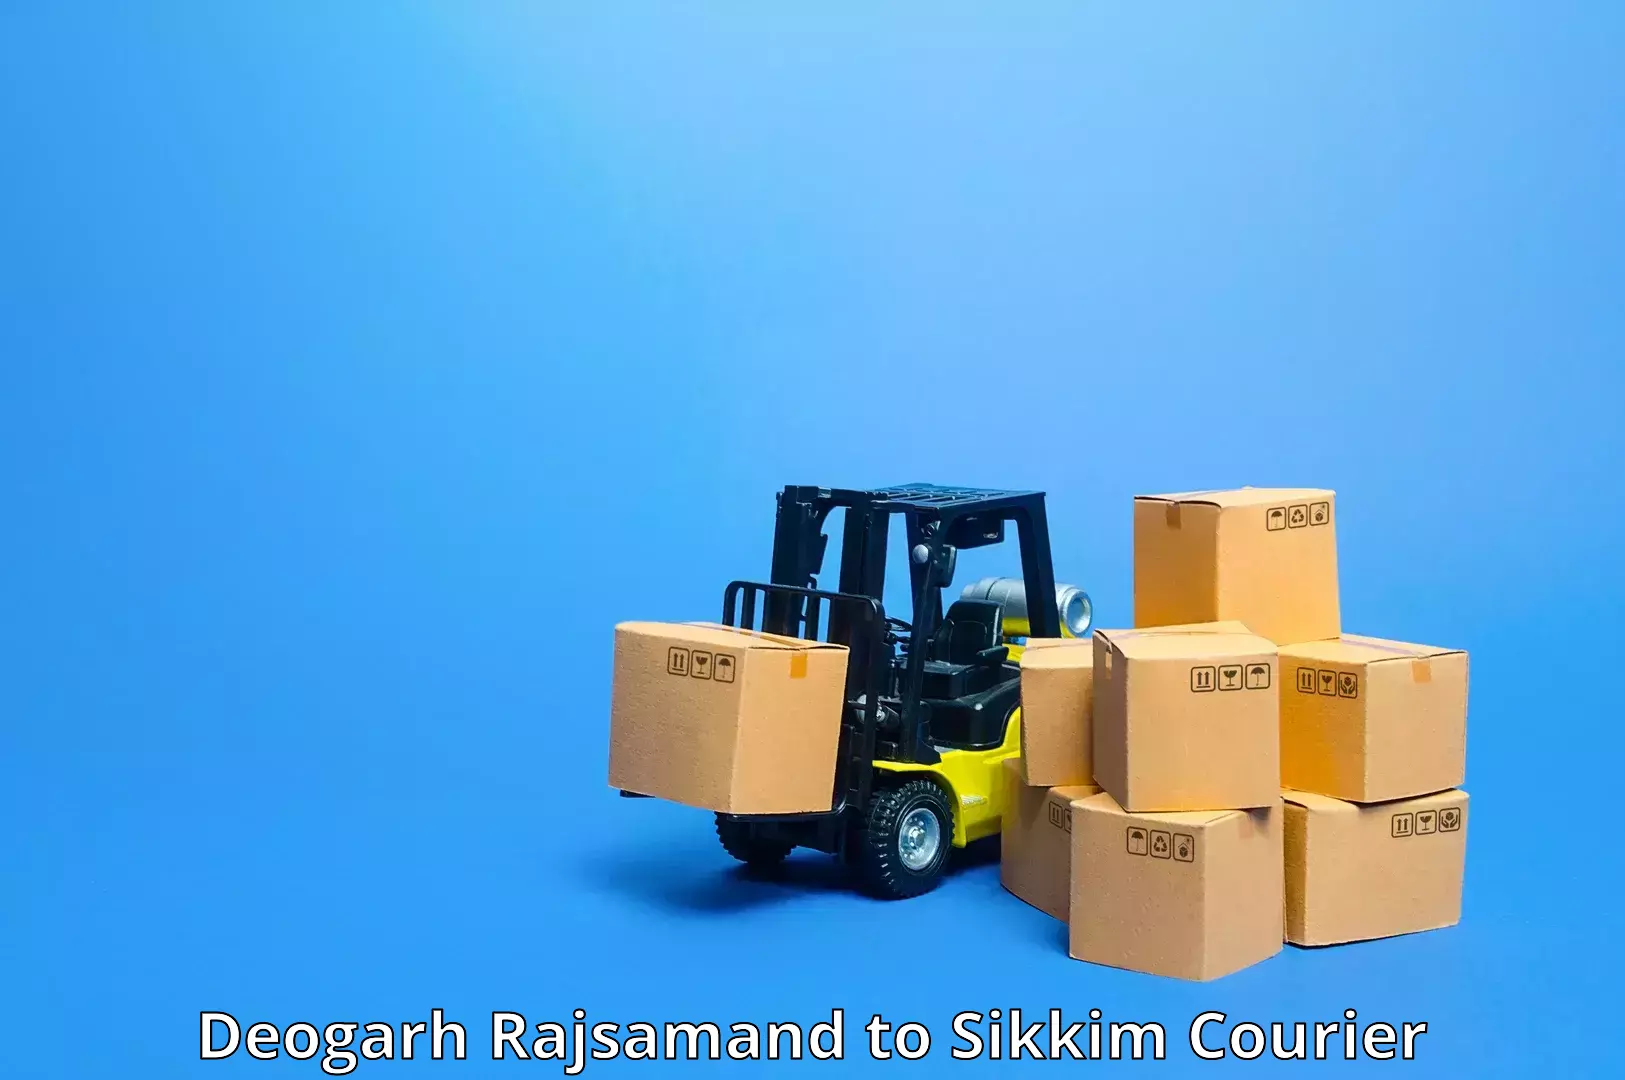 Express delivery network Deogarh Rajsamand to NIT Sikkim